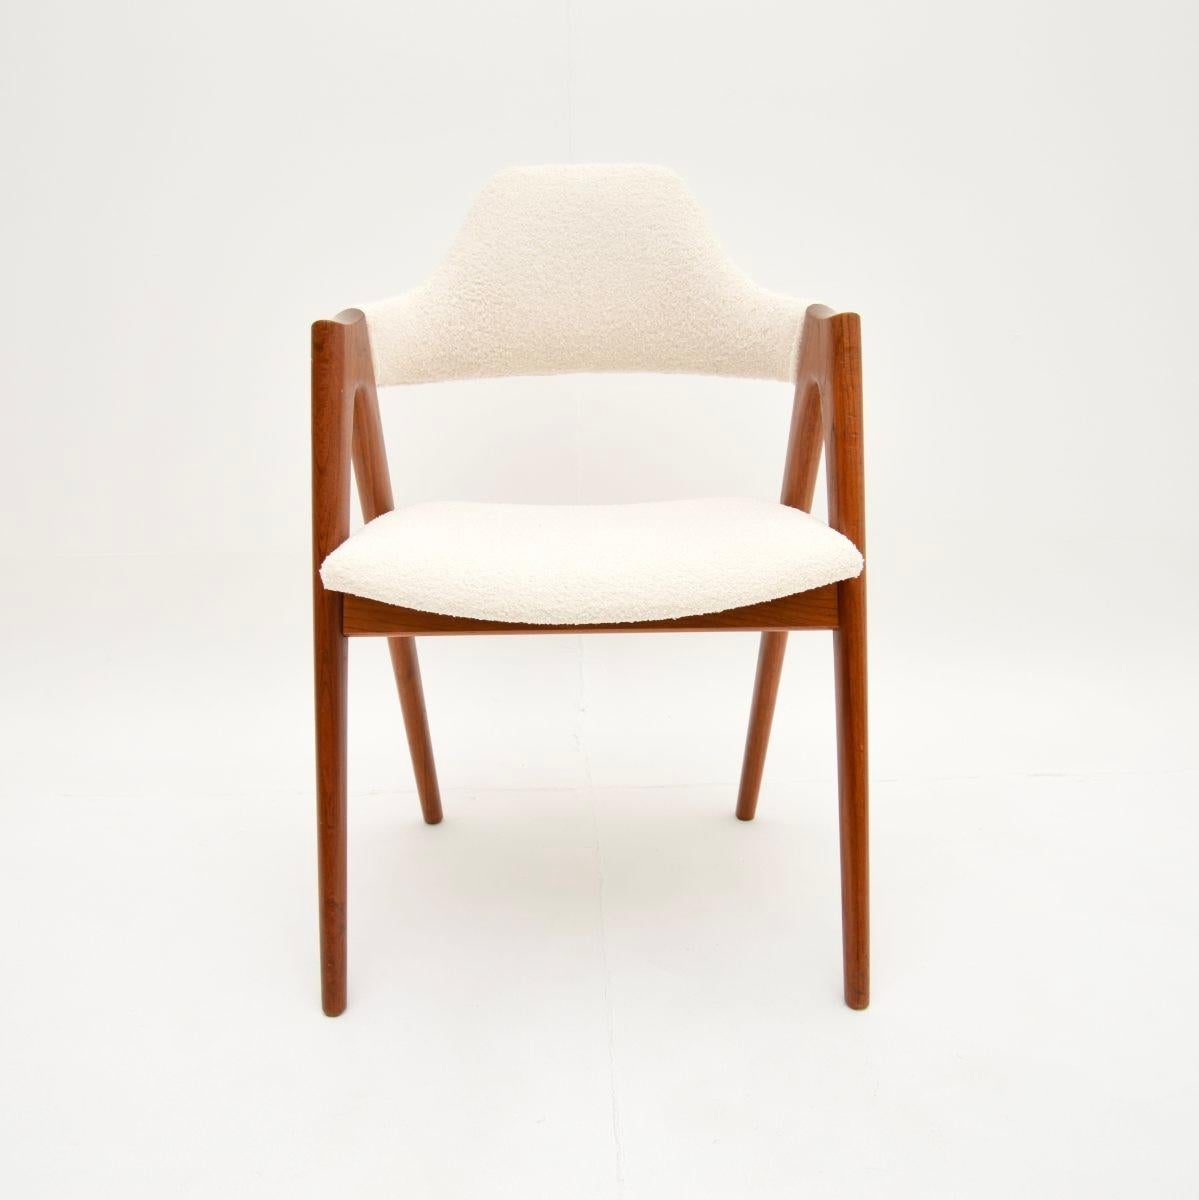 A stylish and extremely well made Danish vintage teak compass chair by Kai Kristiansen. This was recently imported from Denmark, it dates from the 1960’s.

The quality is outstanding, this is a beautiful and iconic design. It is called the compass